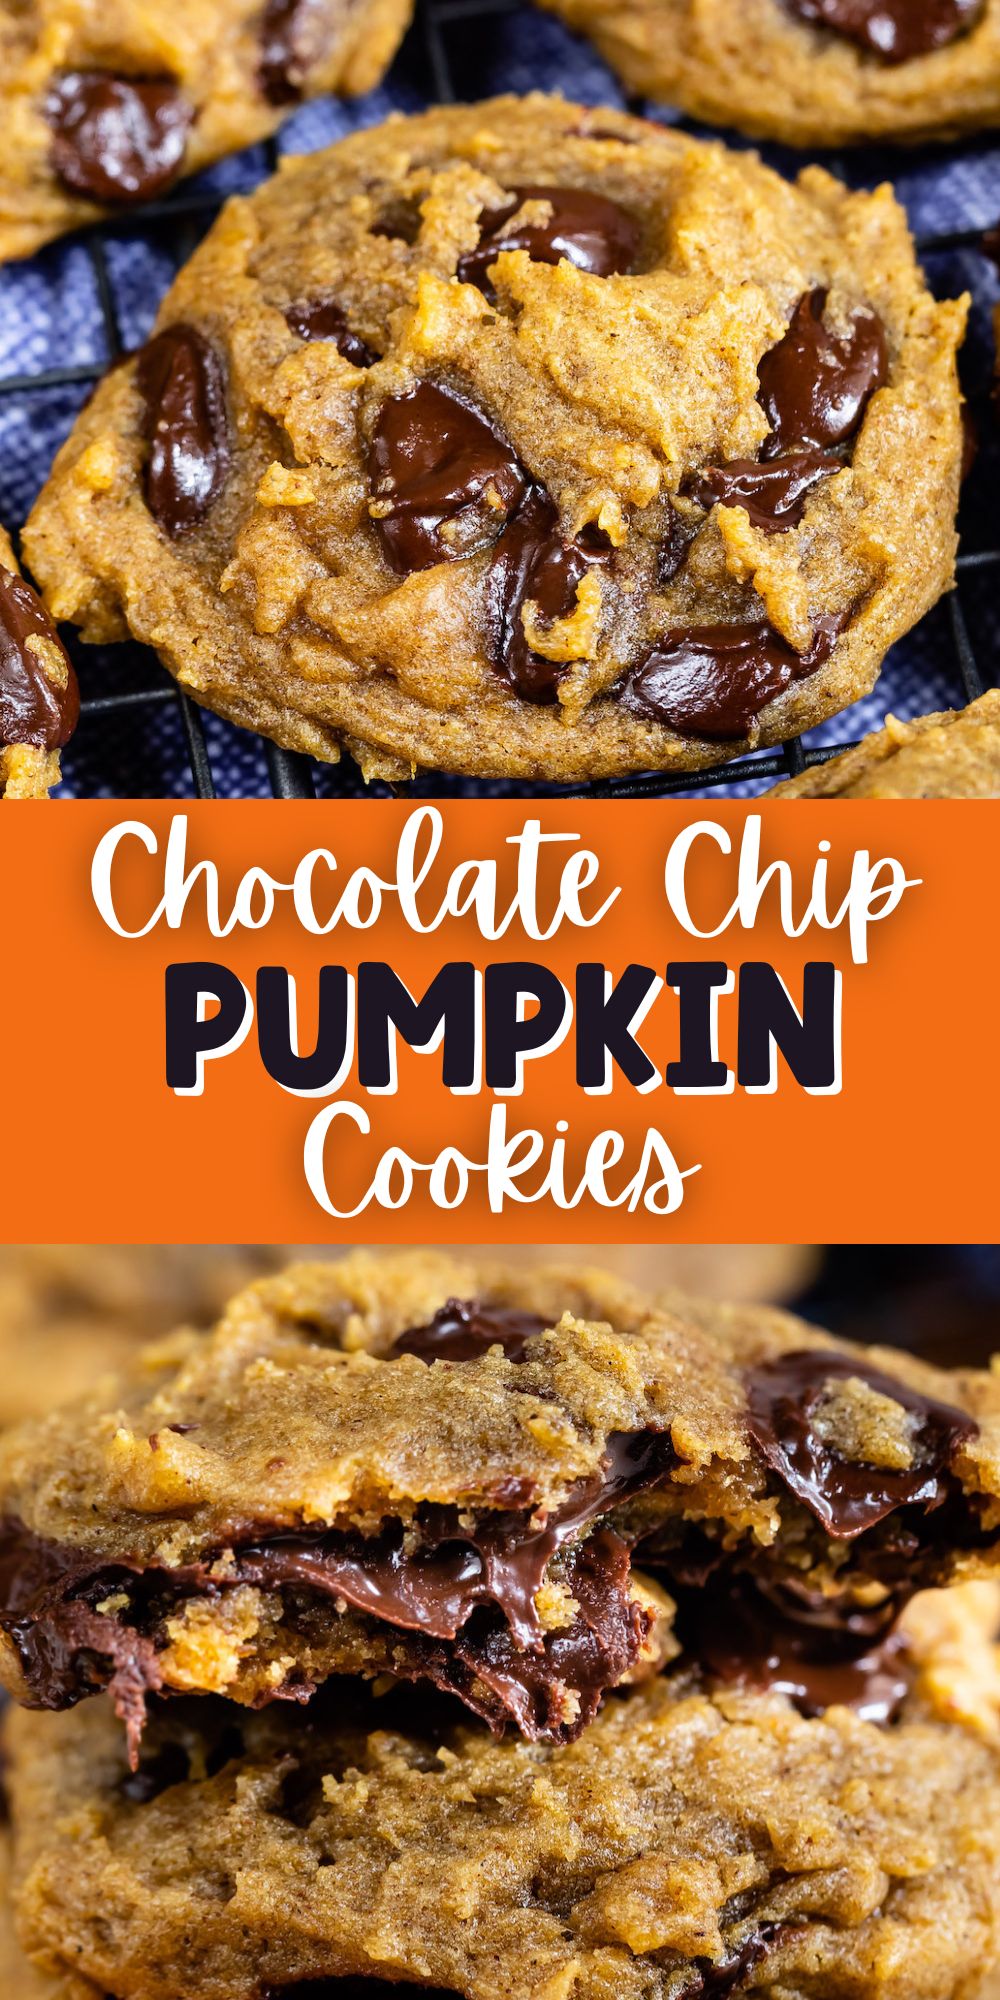 two photos of pumpkin cookies with chocolate chips baked in